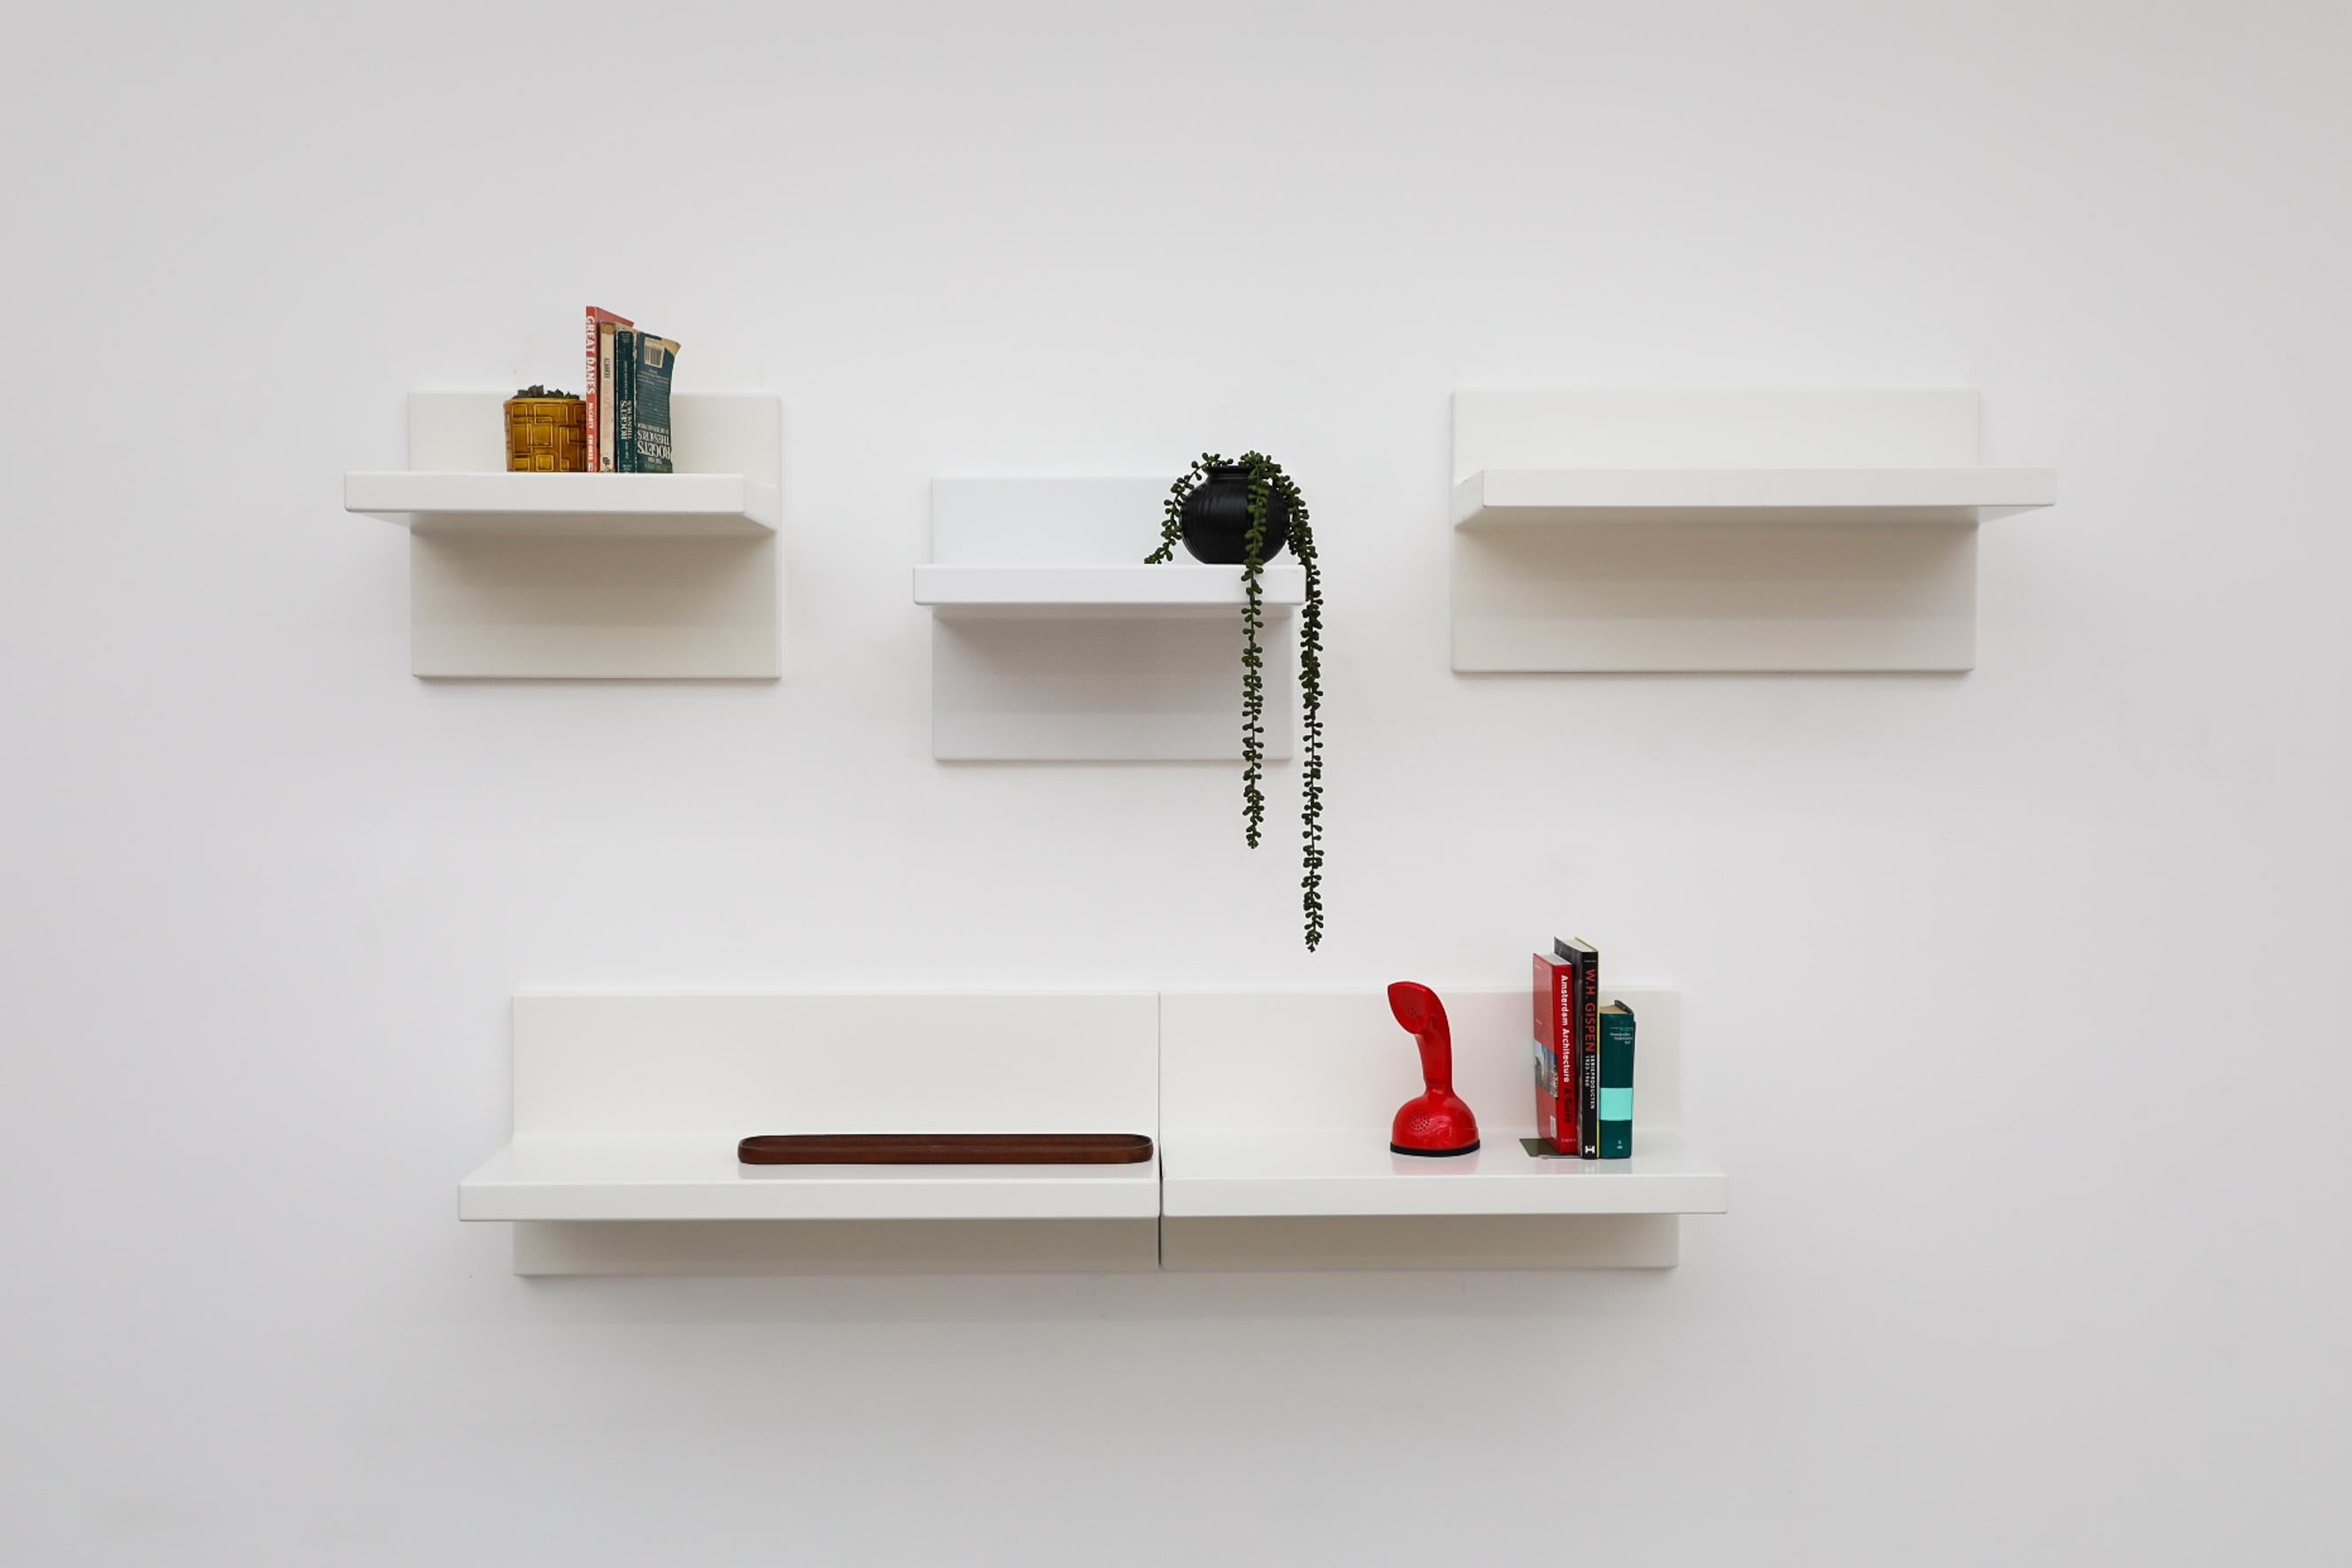 Set of 5 molded, mid century, plastic floating wall shelves, 2 small (1 bright white, 1 off white) 17.75 x 12.125 x 13.75